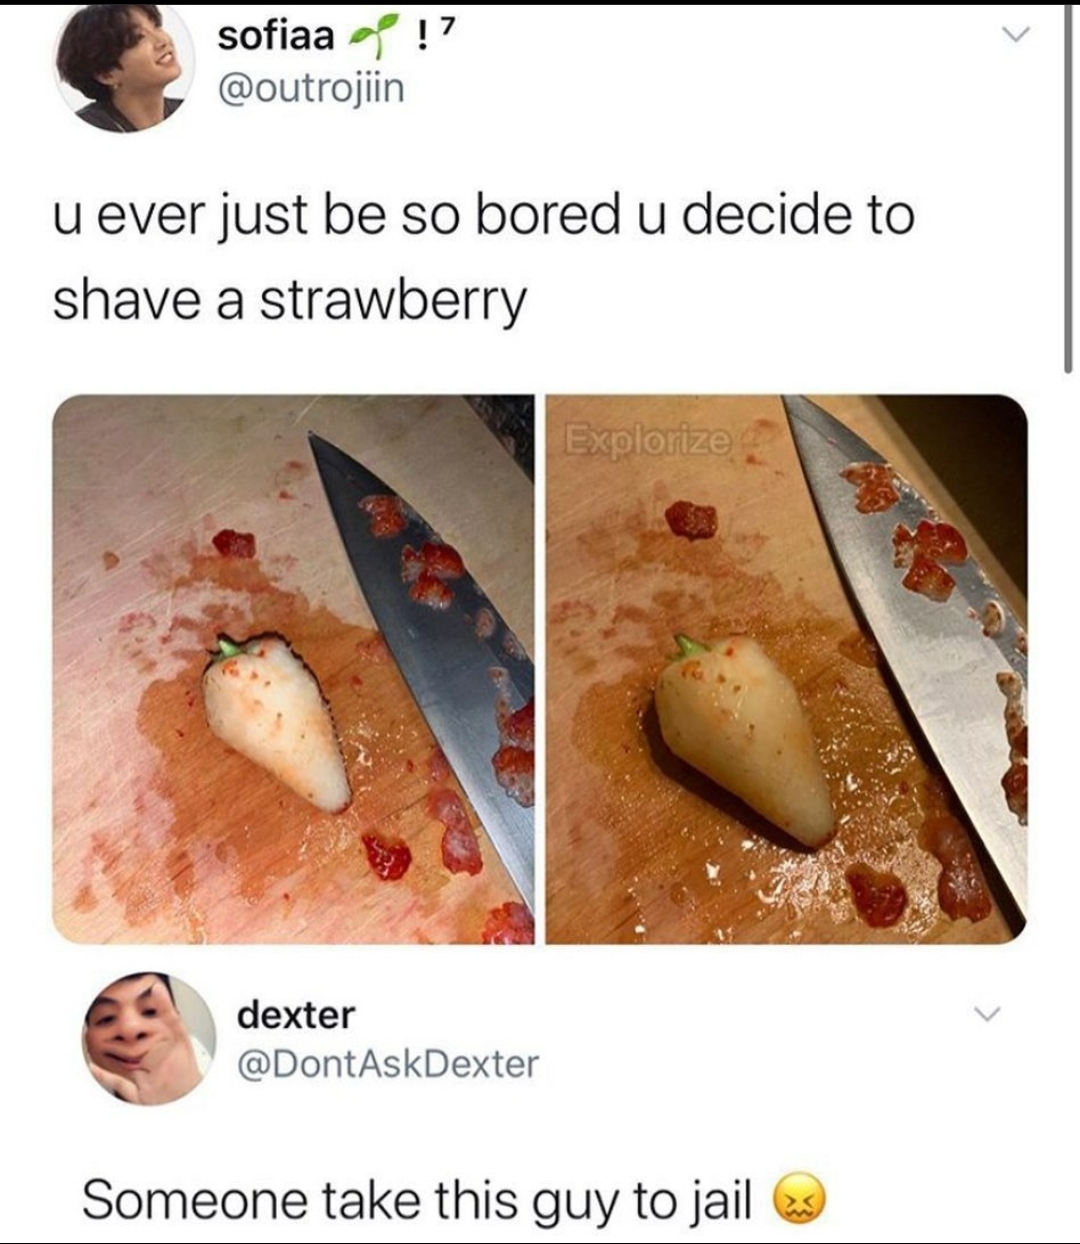 Strawberry Peels - sofiaa !! u ever just be so bored u decide to shave a strawberry Explorze dexter Someone take this guy to jail